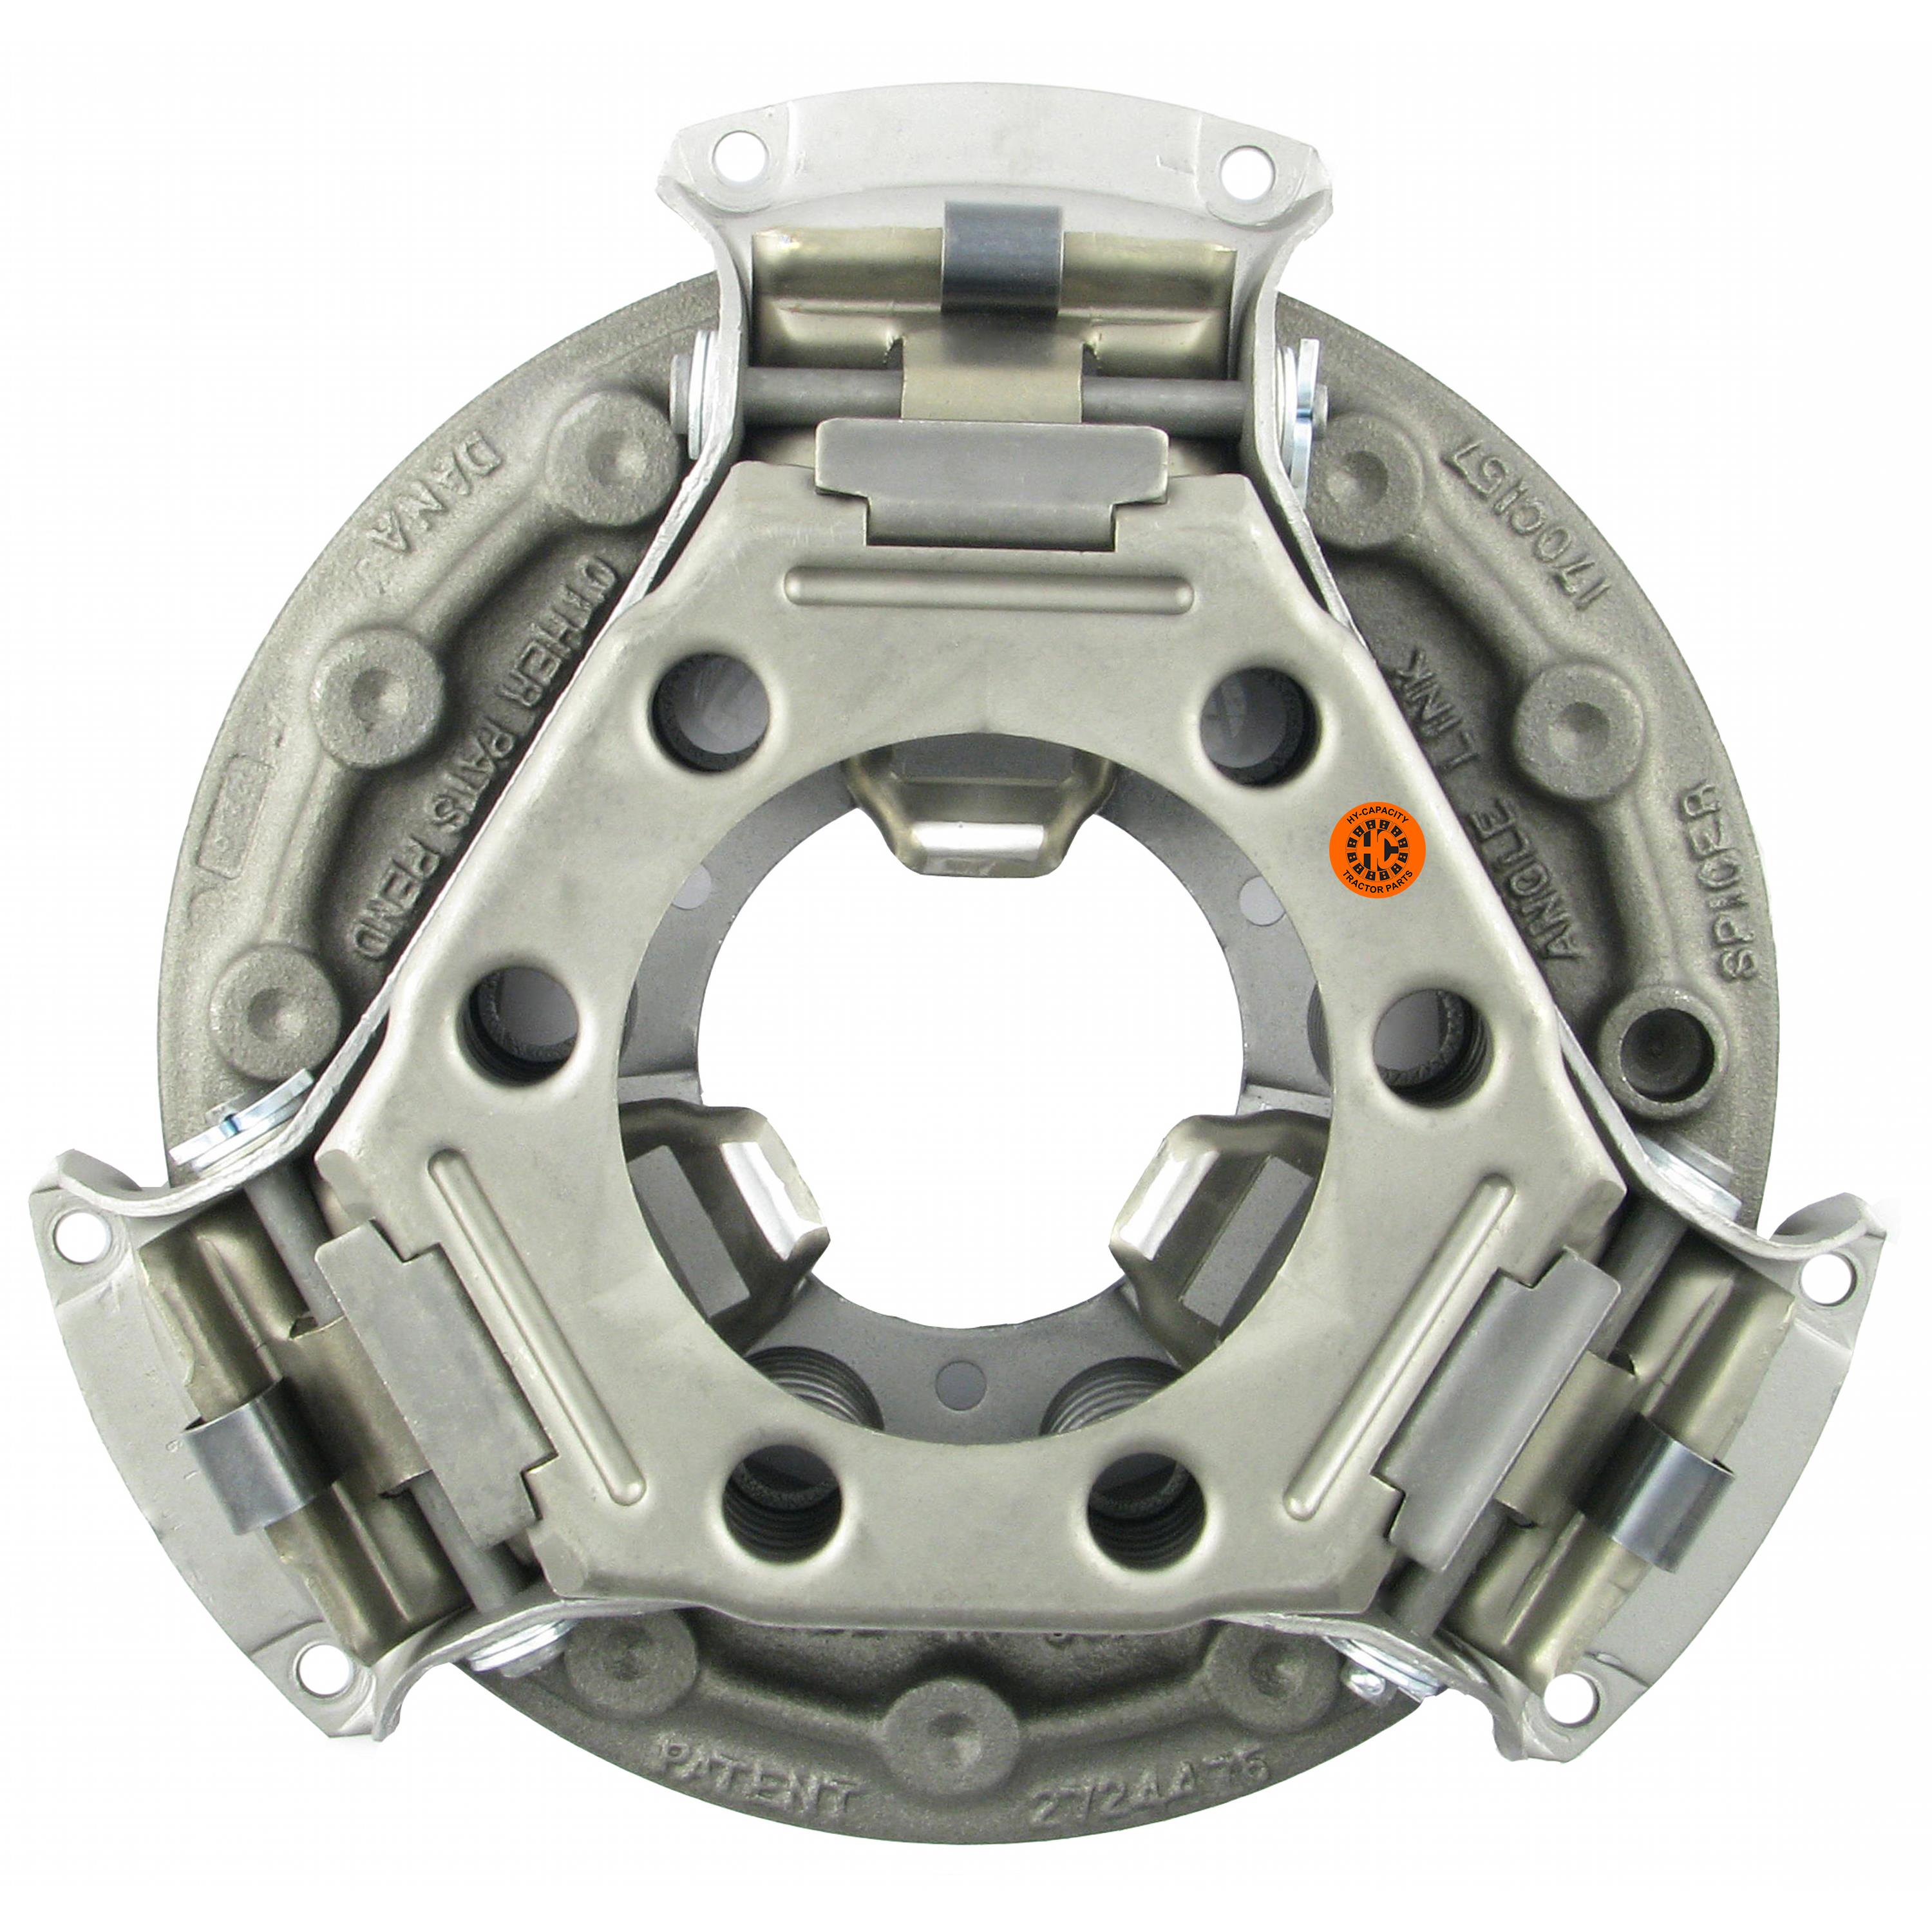 FD063AN | Clutch Kits and Pressure Plates | Clutch | Hy-Capacity